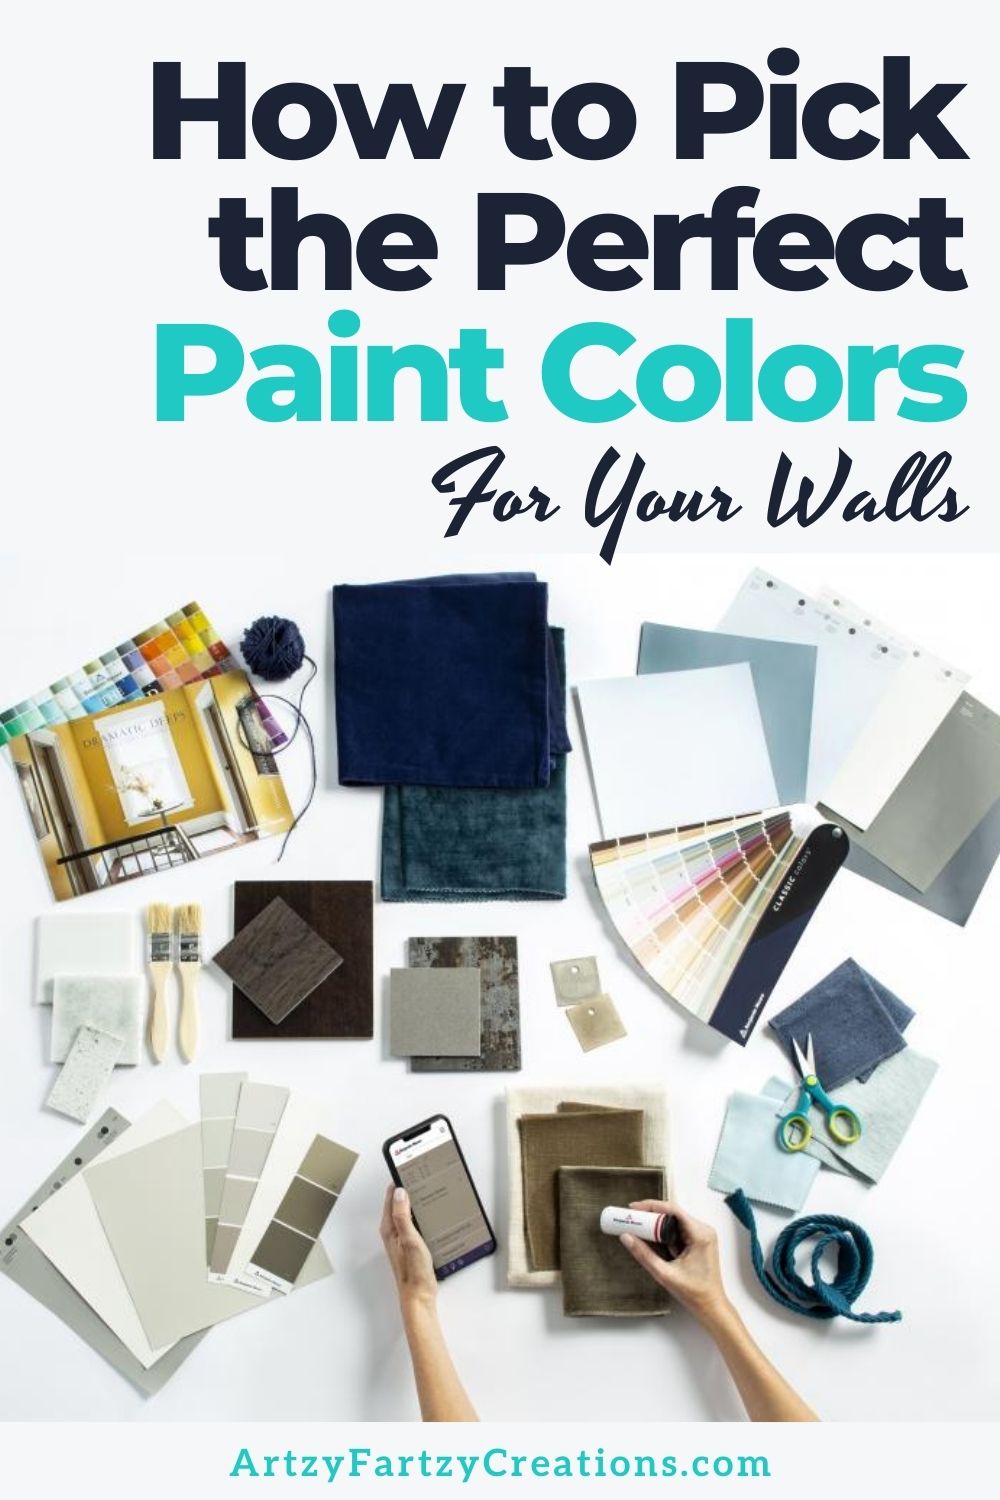 How to Pick the Perfect Paint Colors for Your Walls by Cherl Phan @ ArtzyFartzyCreations.com